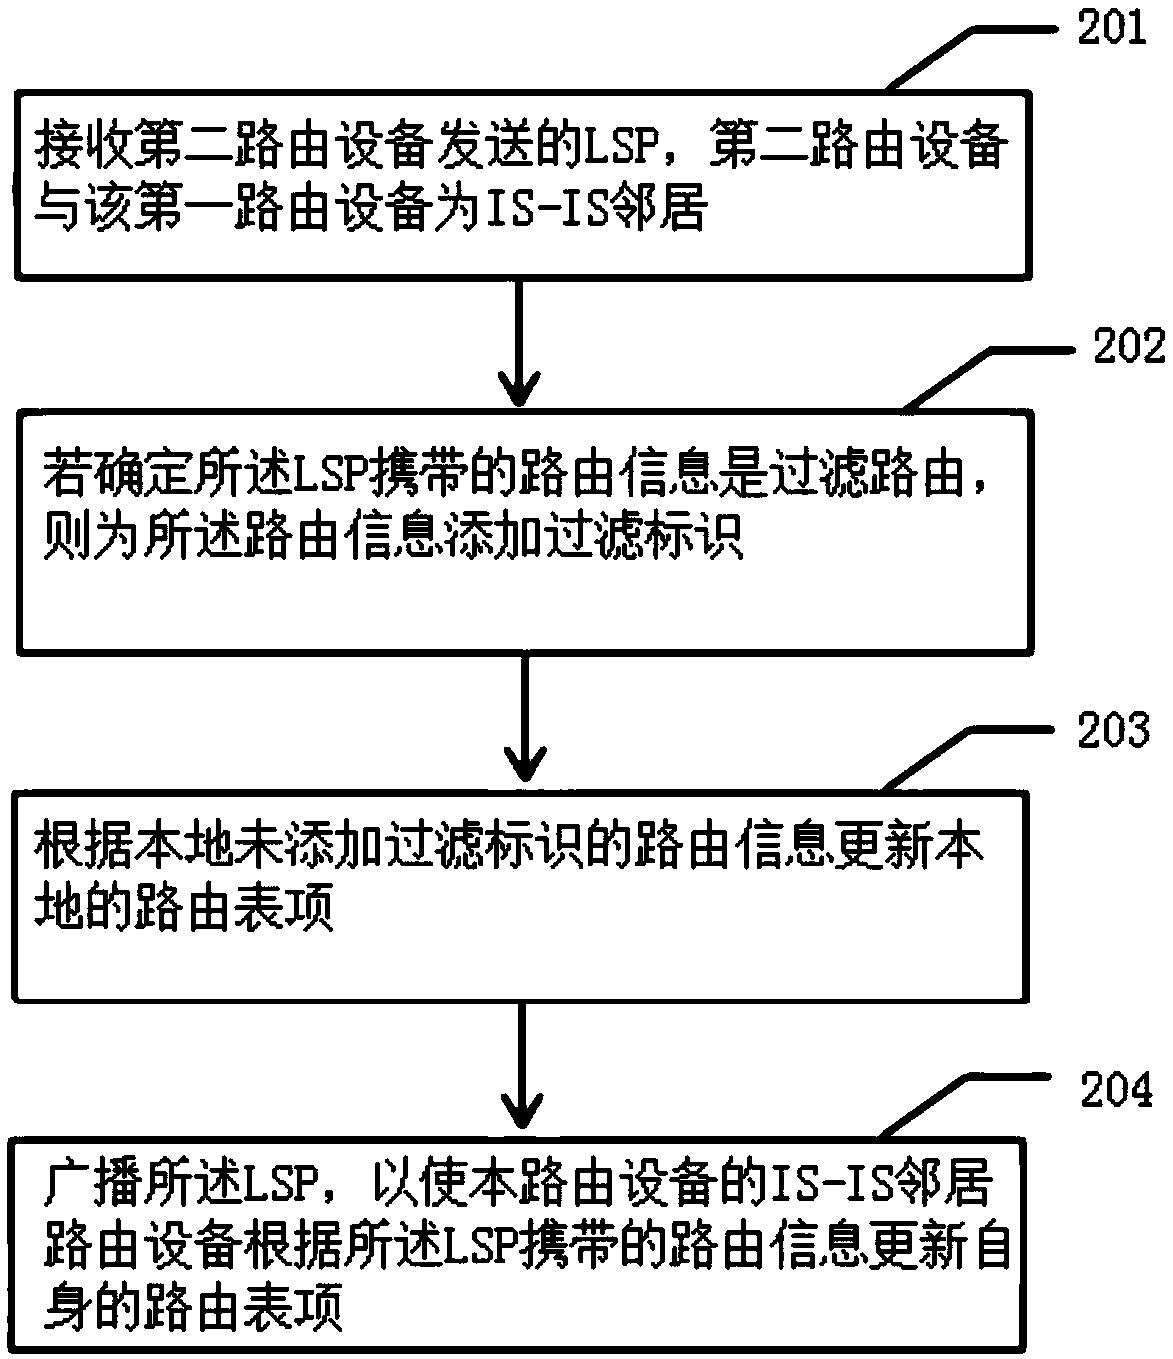 A method and apparatus for route calculation